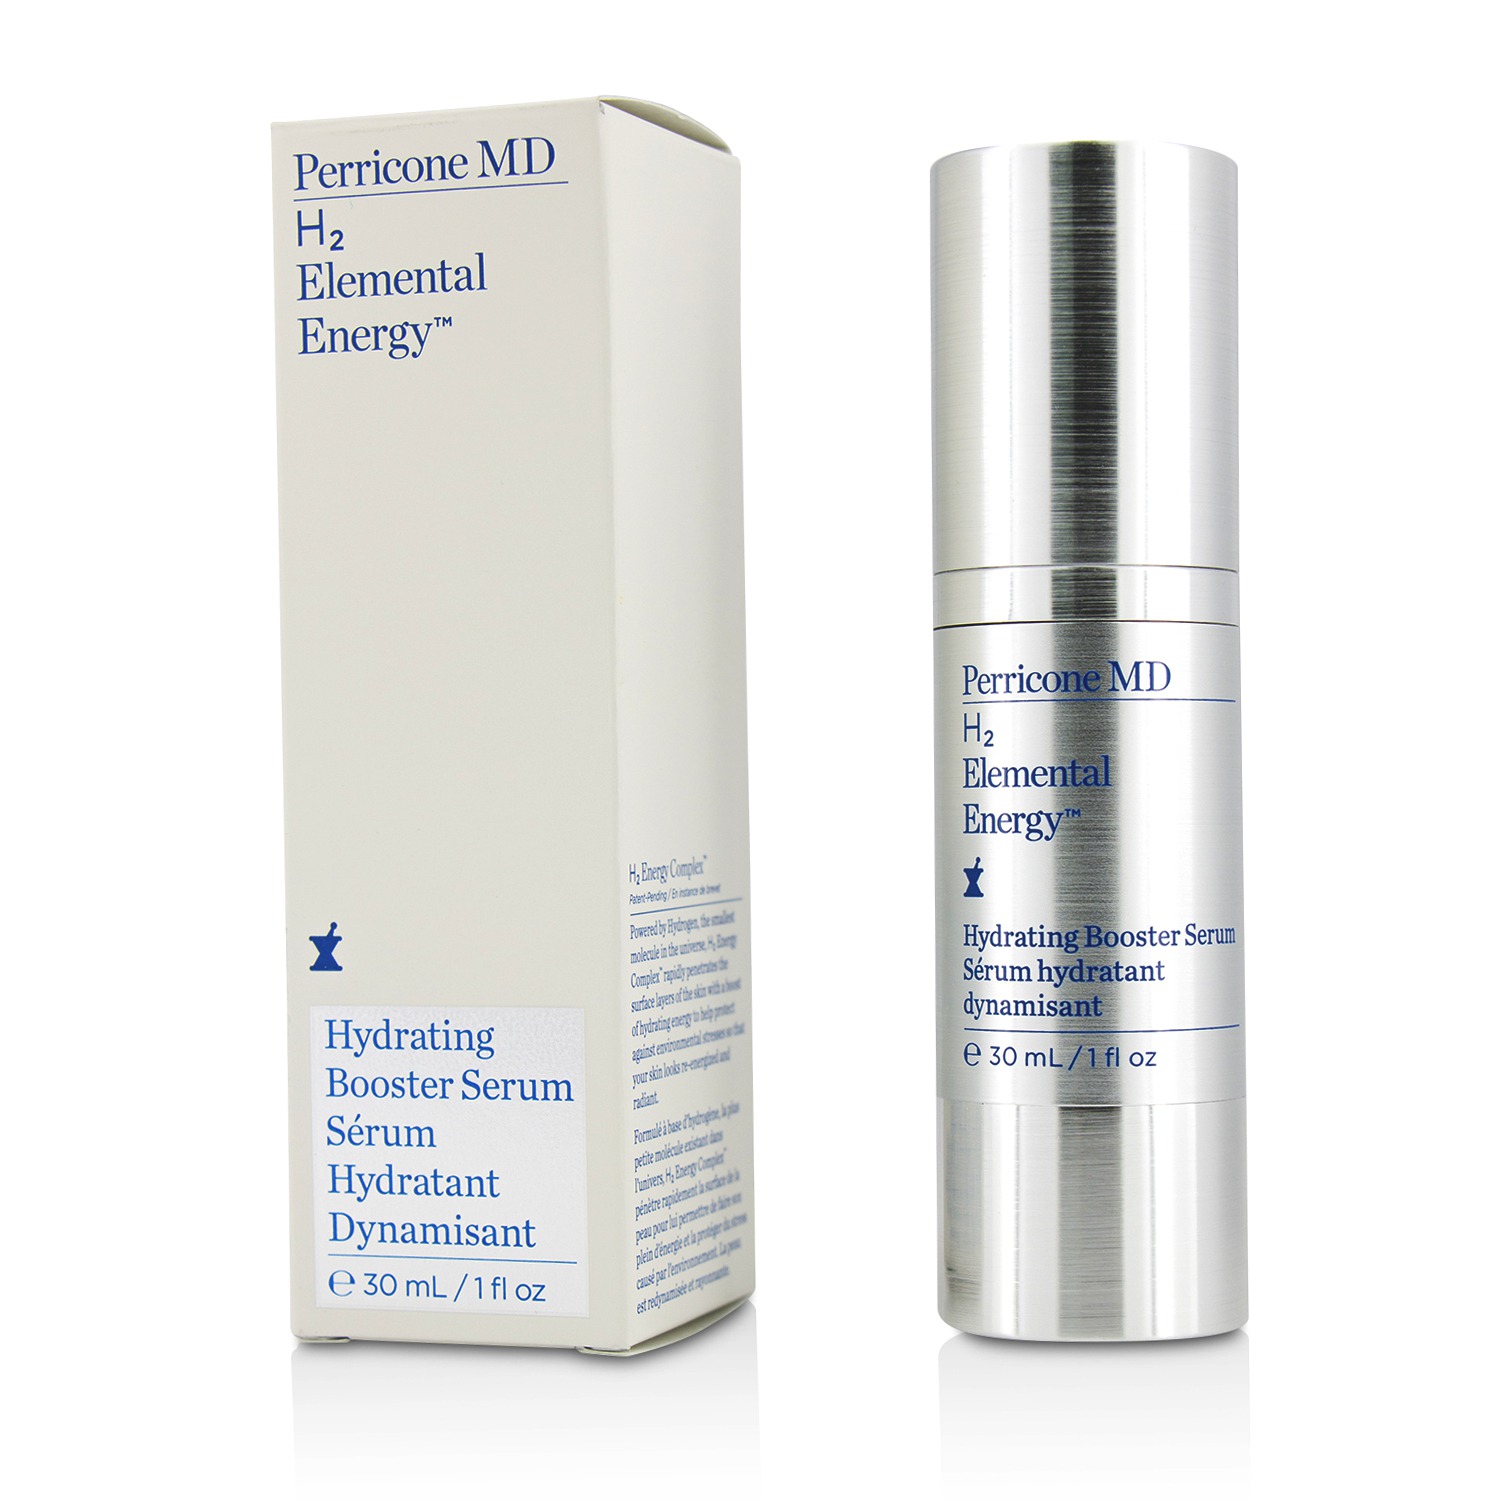 H2 Elemental Energy Hydrating Booster Serum Perricone MD Image